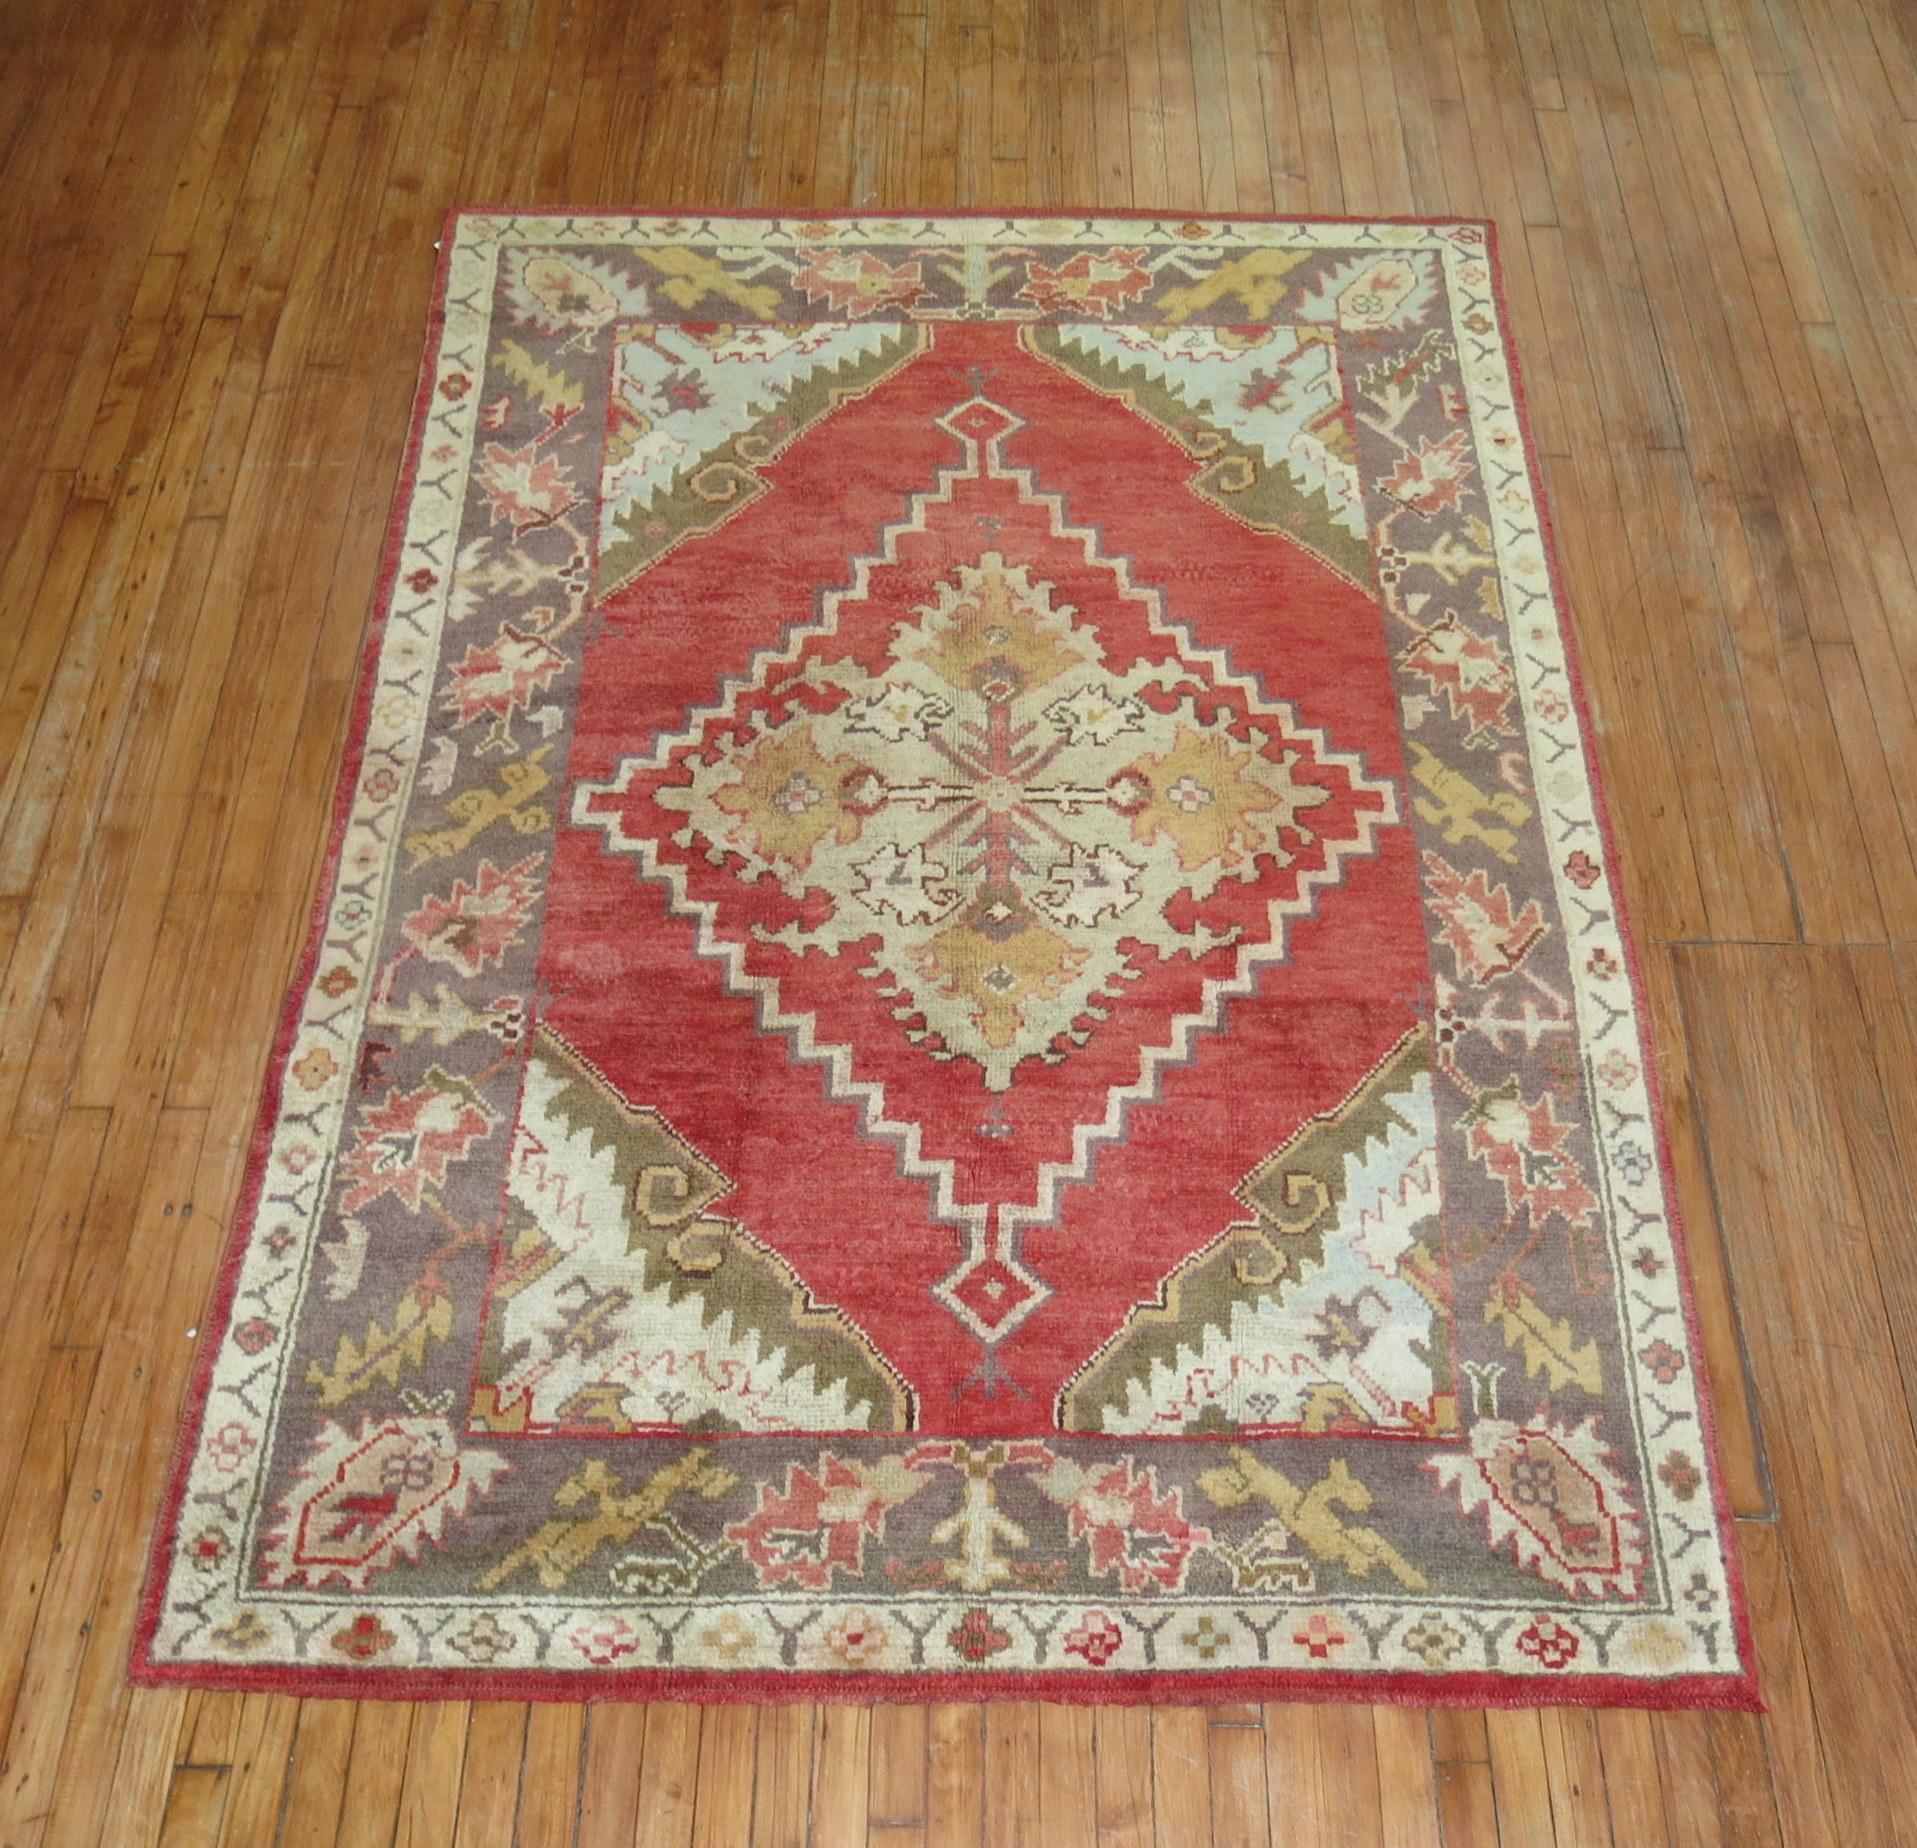 Early 20th-century Turkish Oushak rug with a medallion and border pattern on a red field

Measures: 5'7